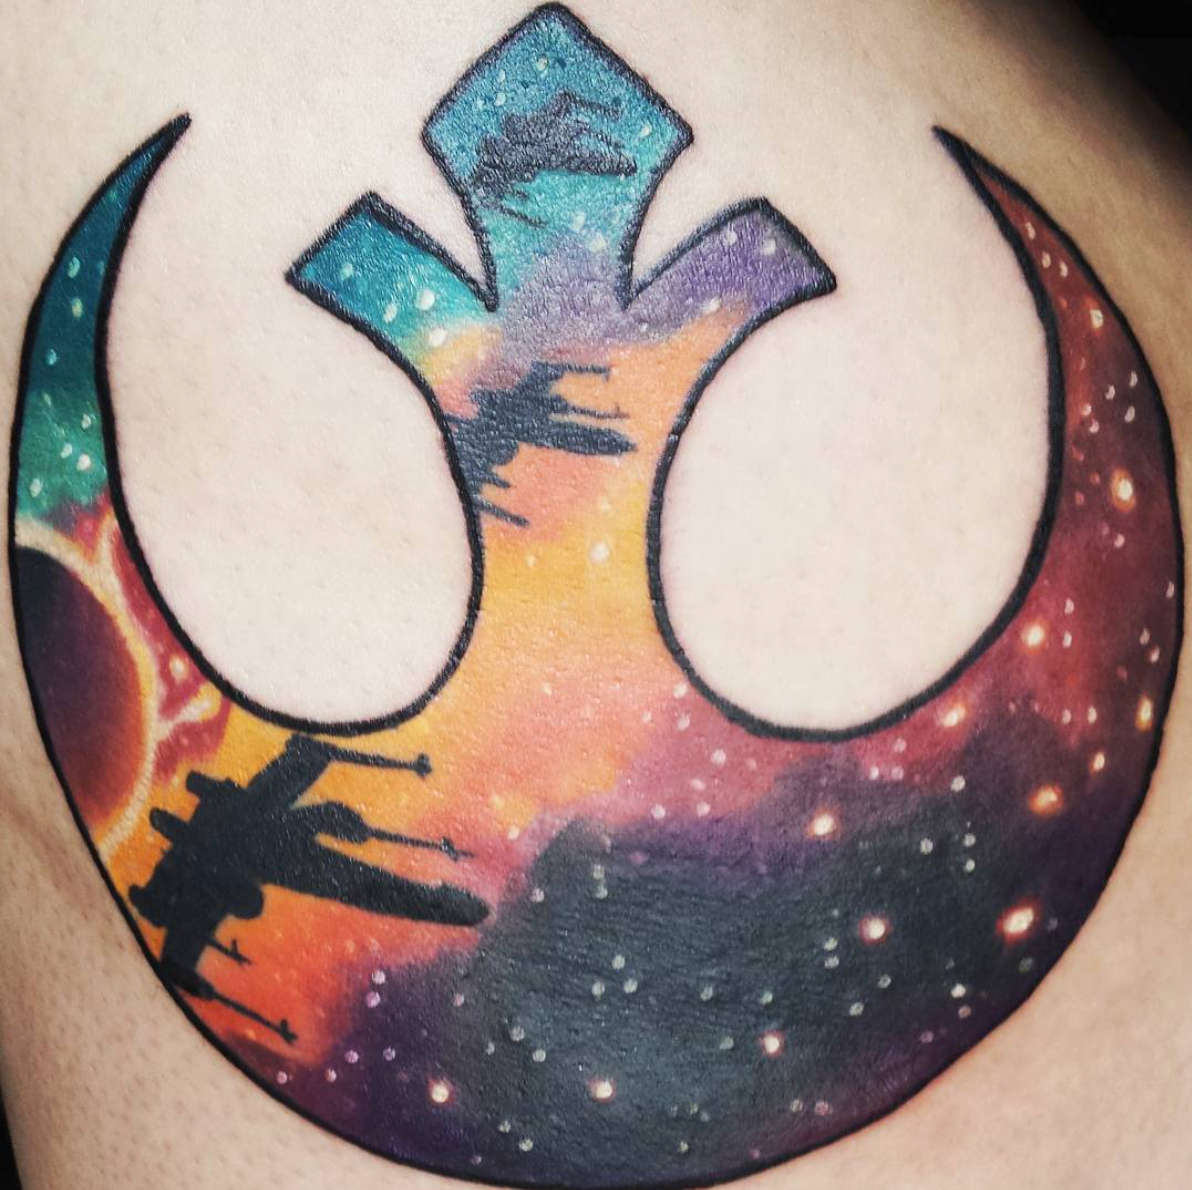 The Rebel Alliance symbol with a galaxy as the background